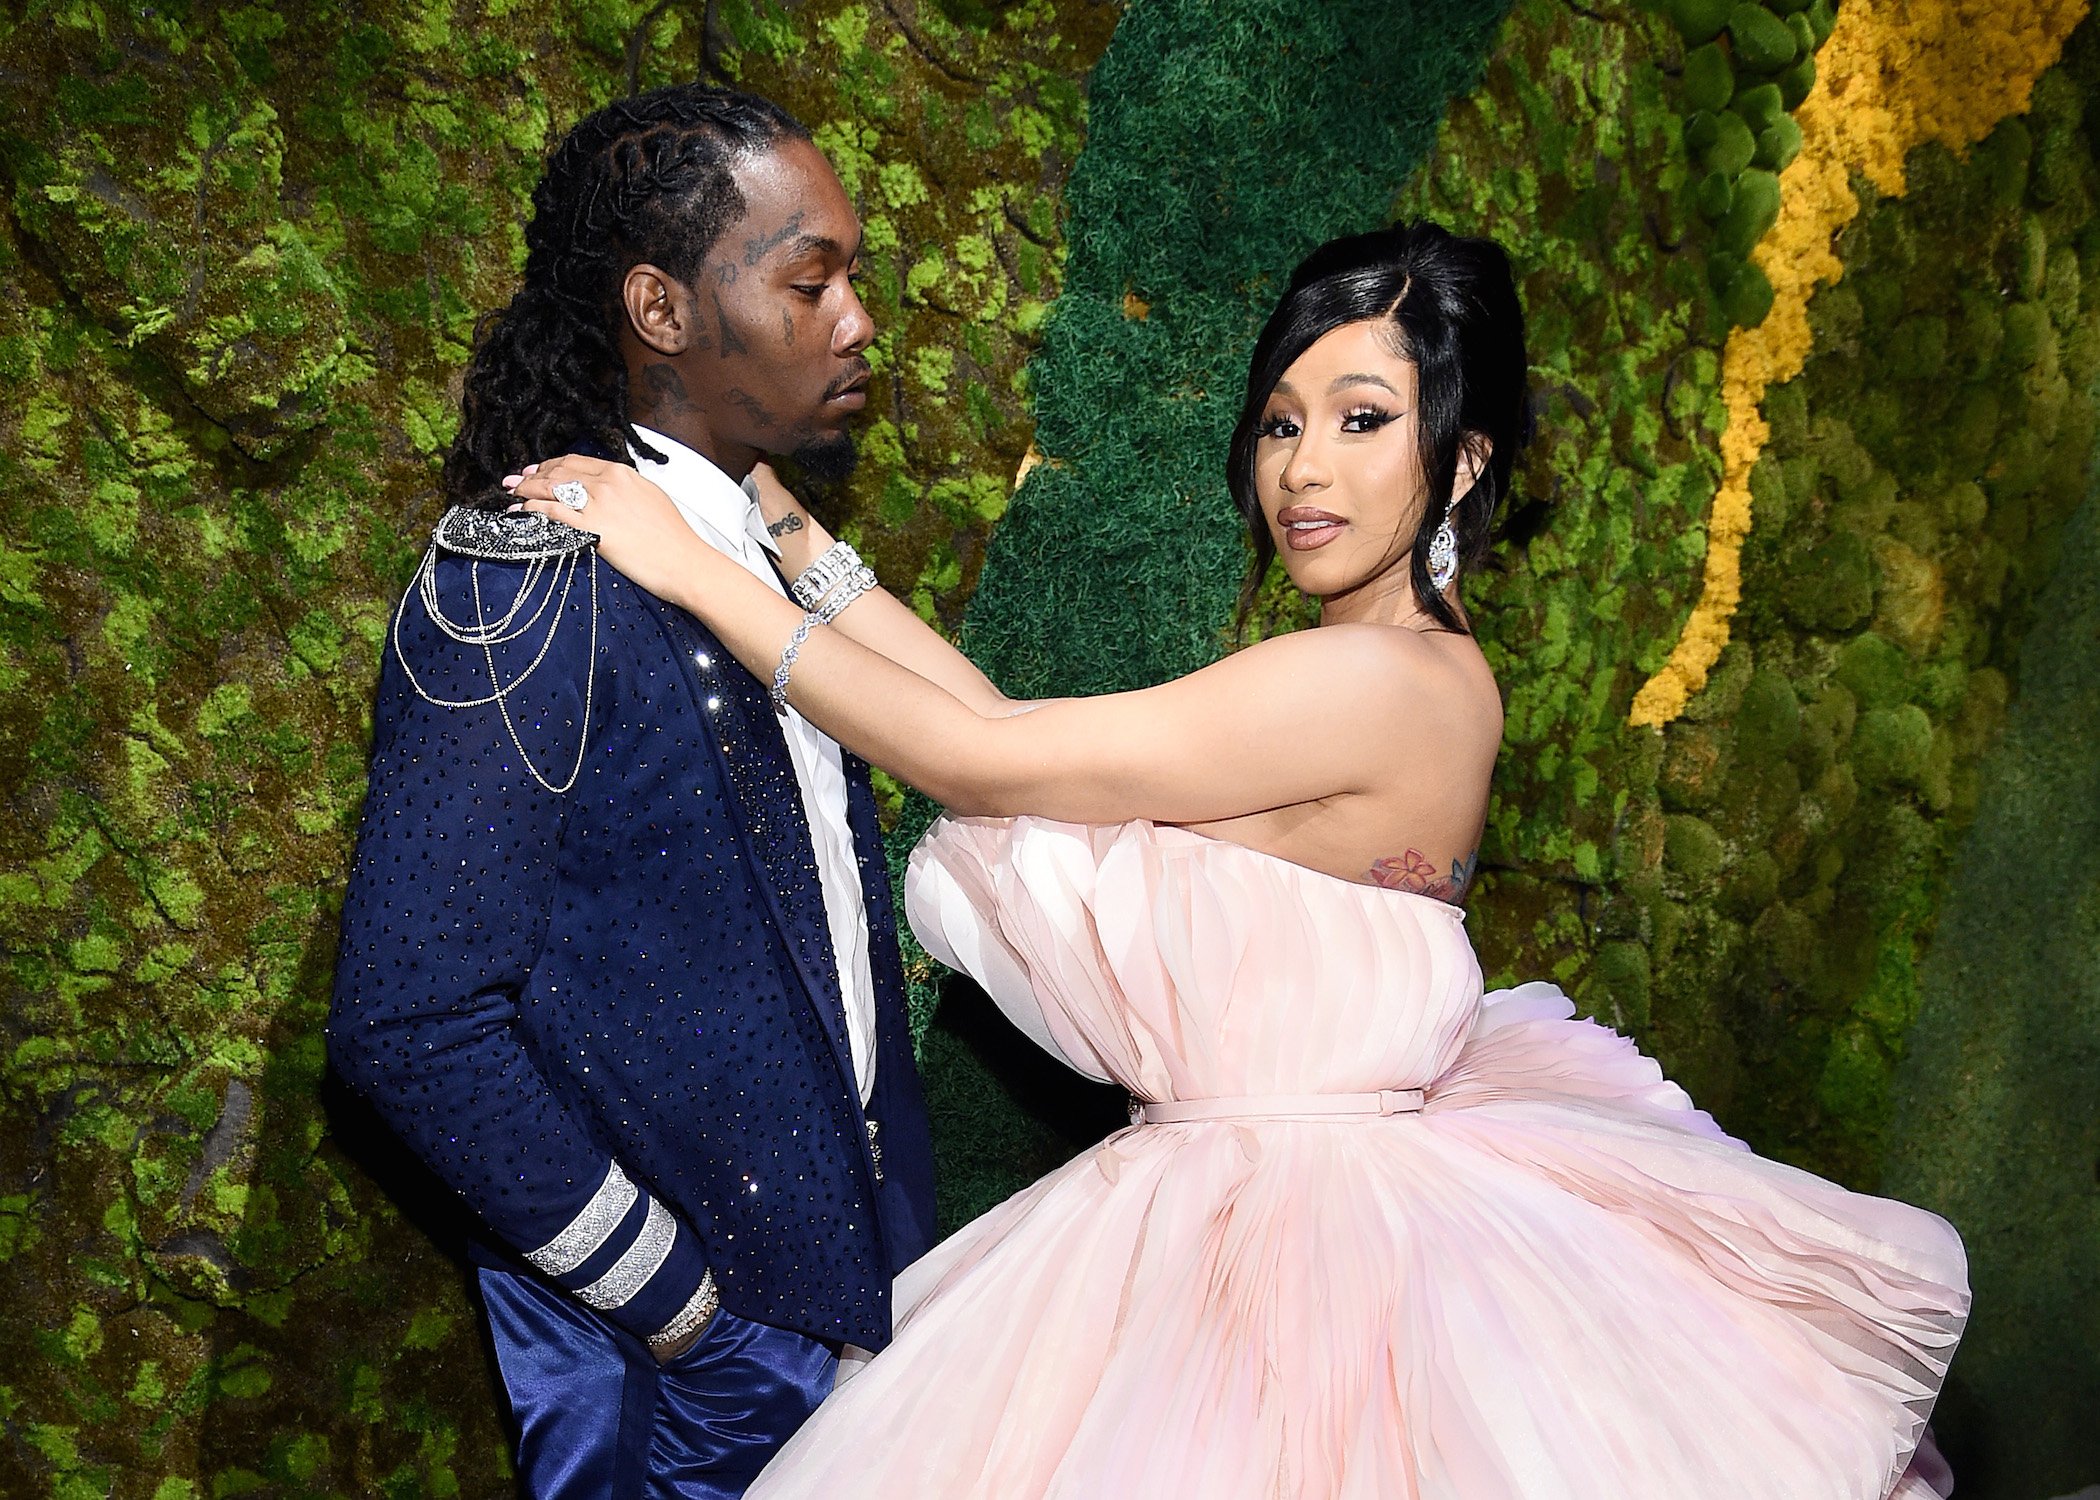 Cardi B Says She Left Offset Because She Didn't Want to “Wait